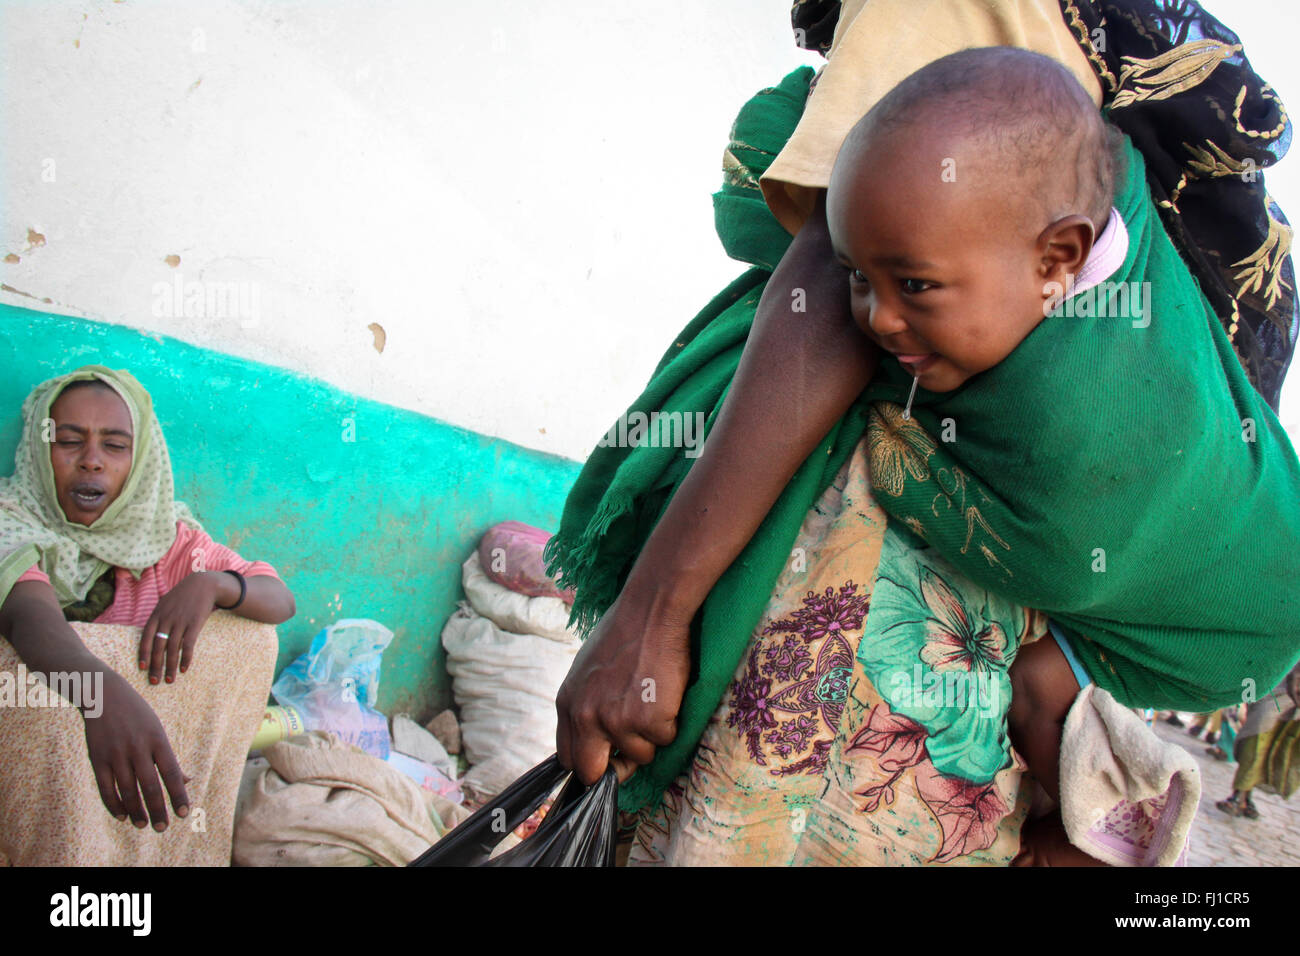 A woman carries her baby on her back in the market of Harar , Ethiopia Stock Photo